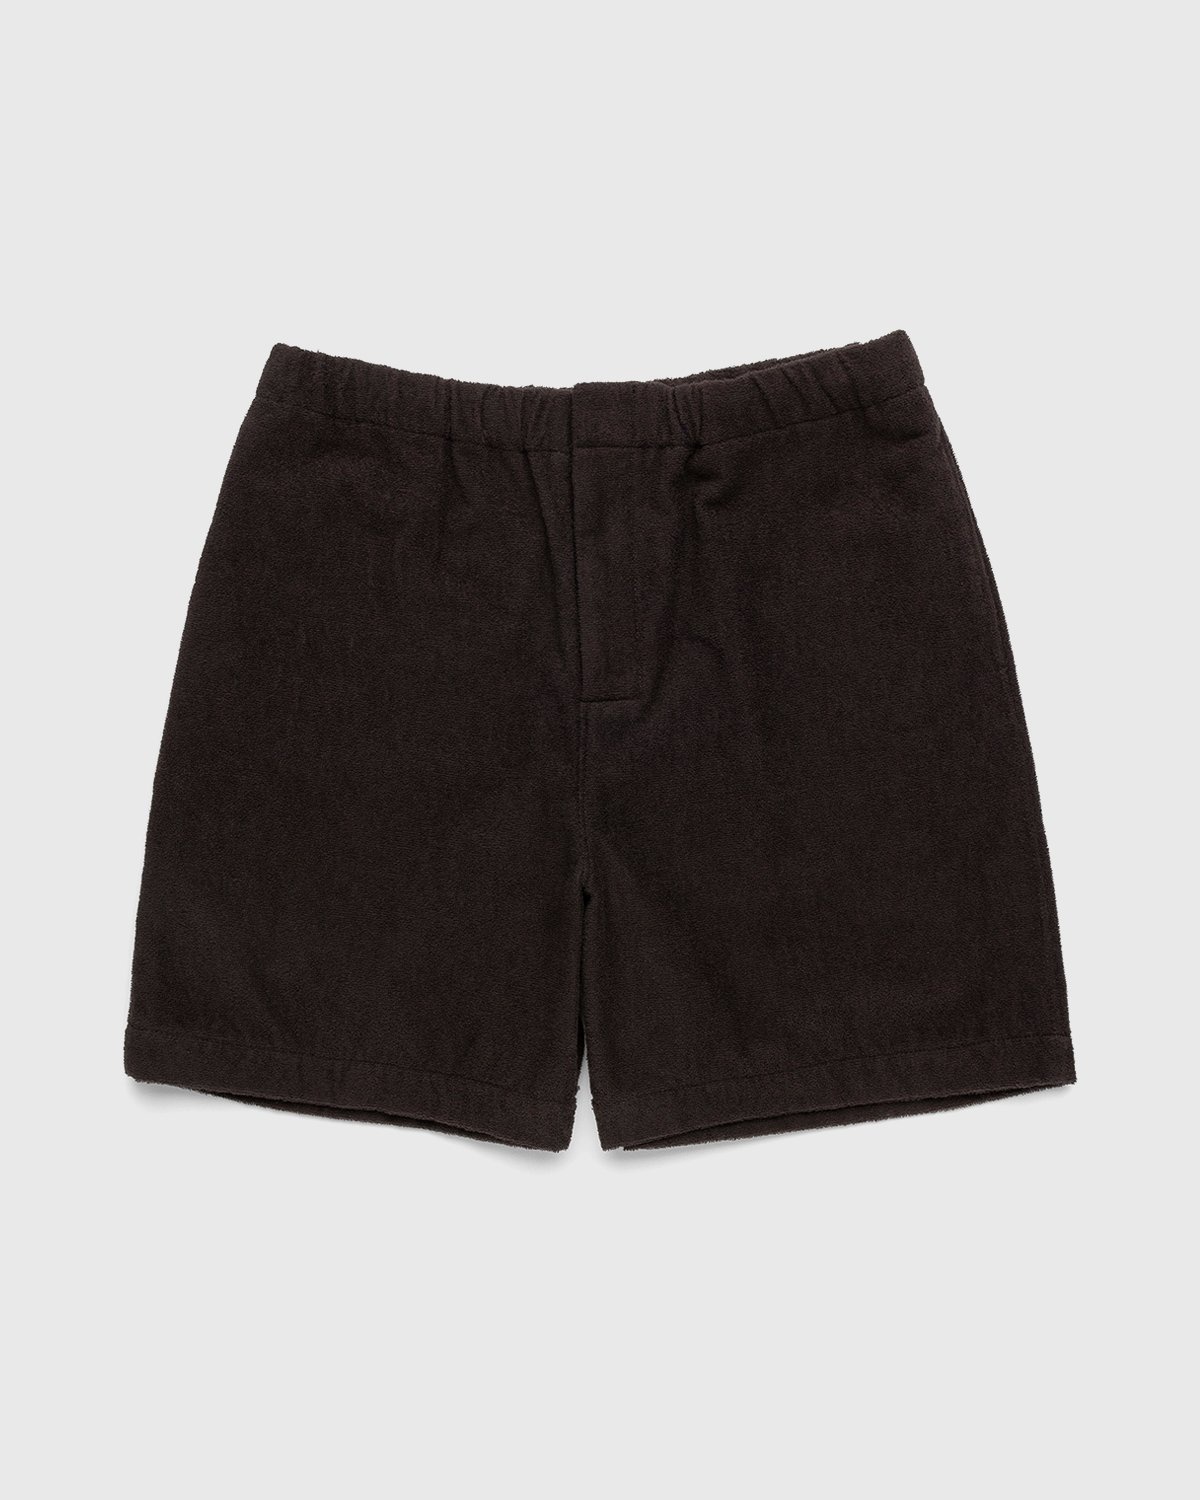 Auralee – Cotton Terry Cloth Shorts Brown - Short Cuts - Brown - Image 1